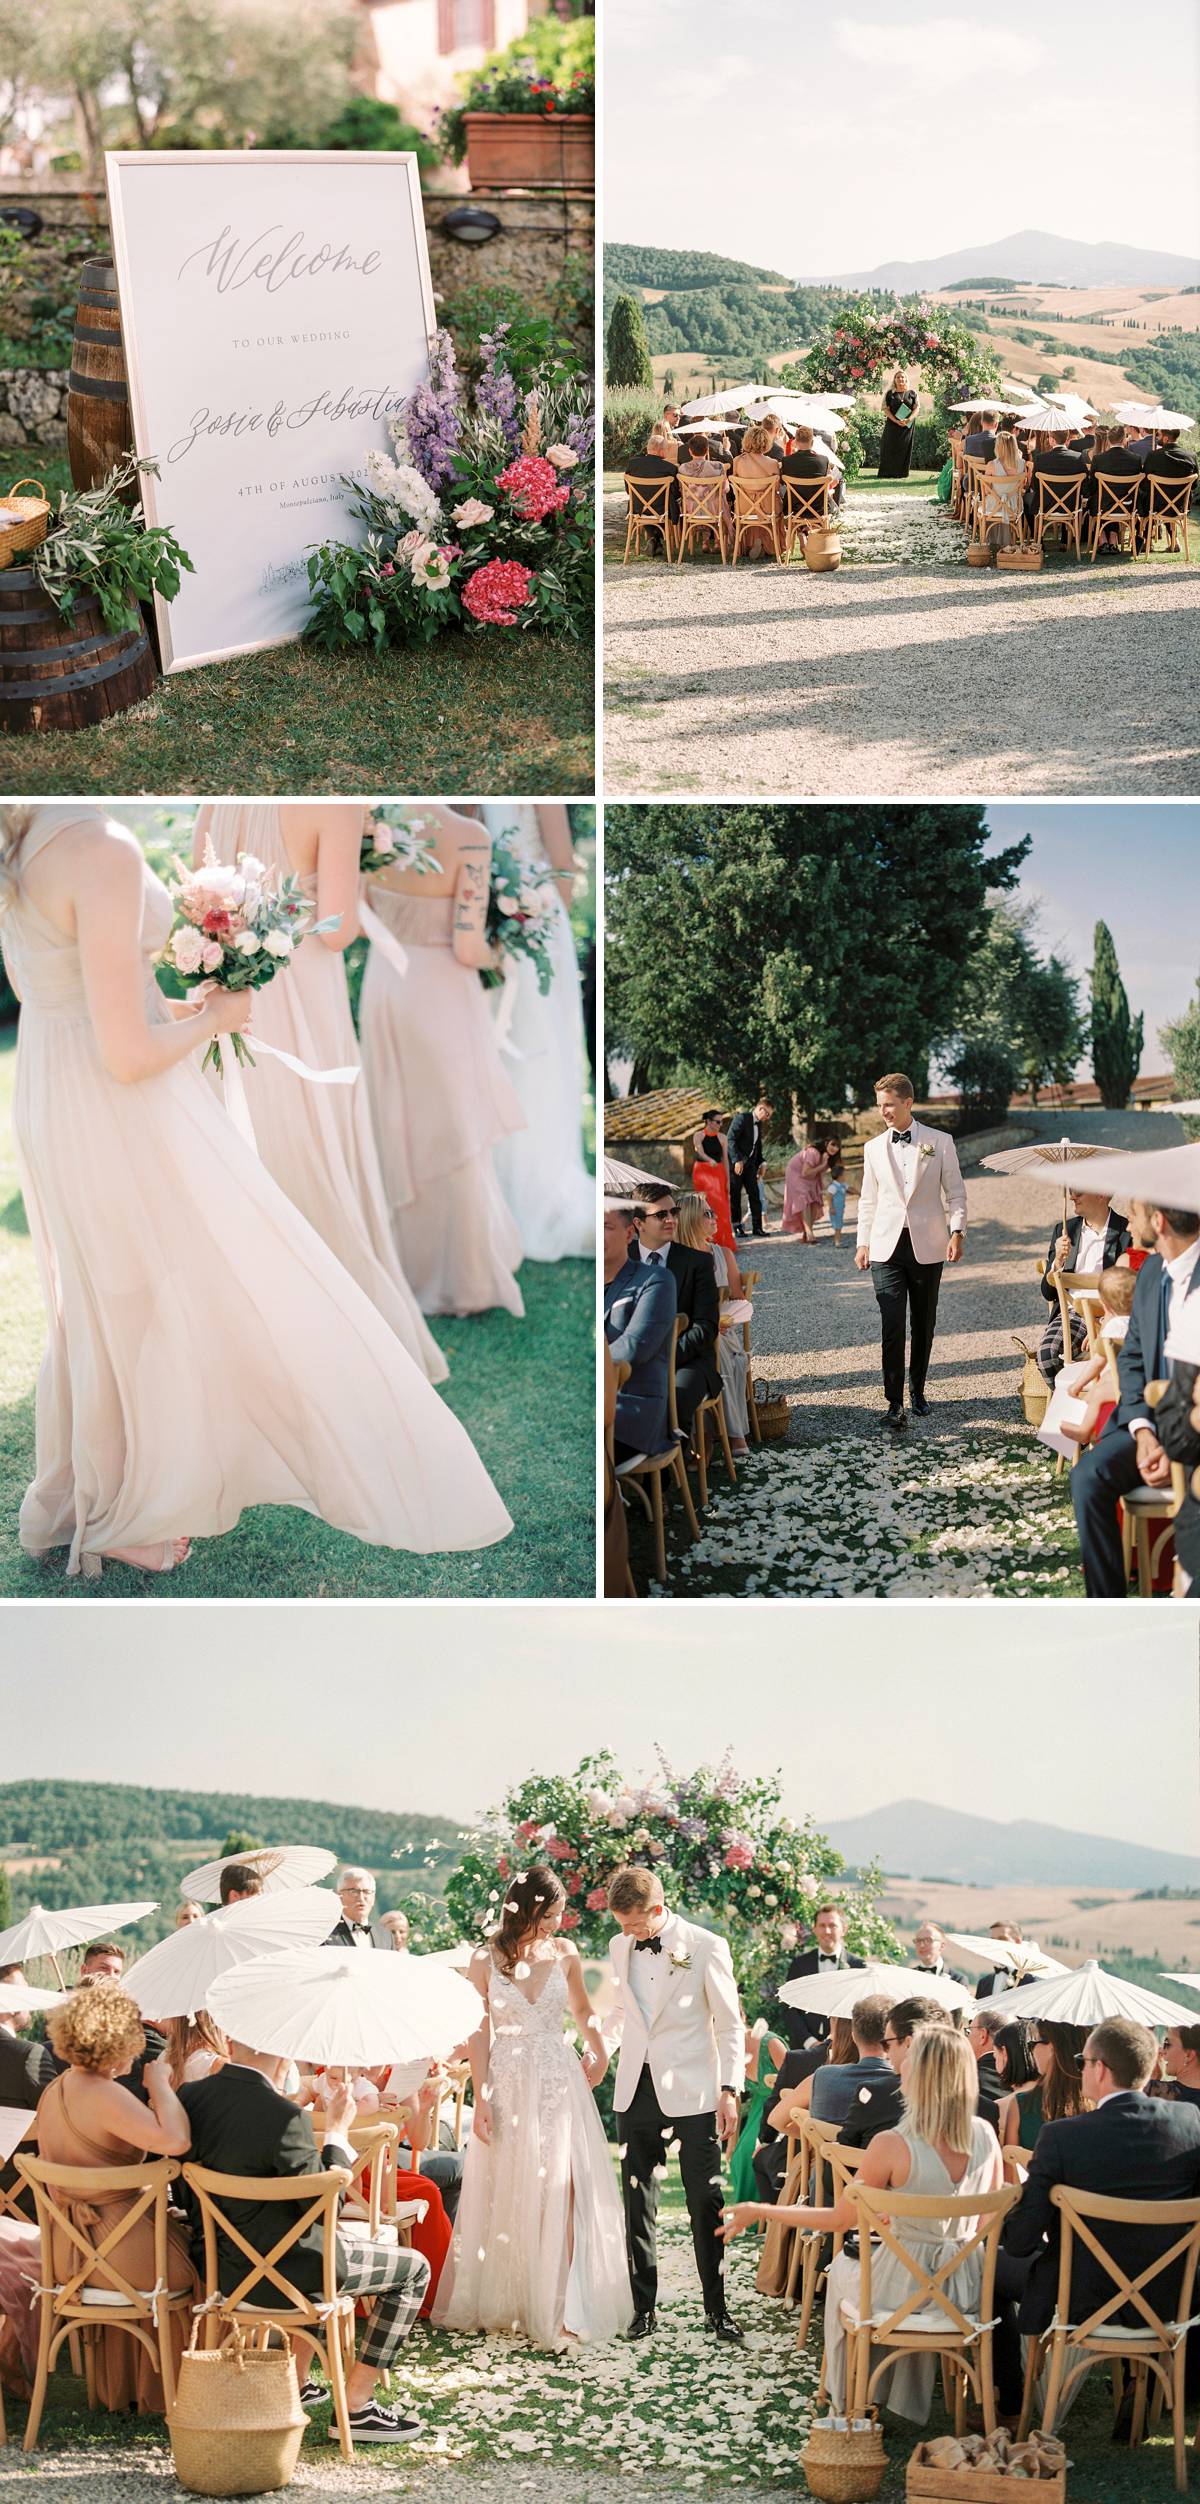 wedding ceremony with large floral arch overlooking the Tuscany landscape